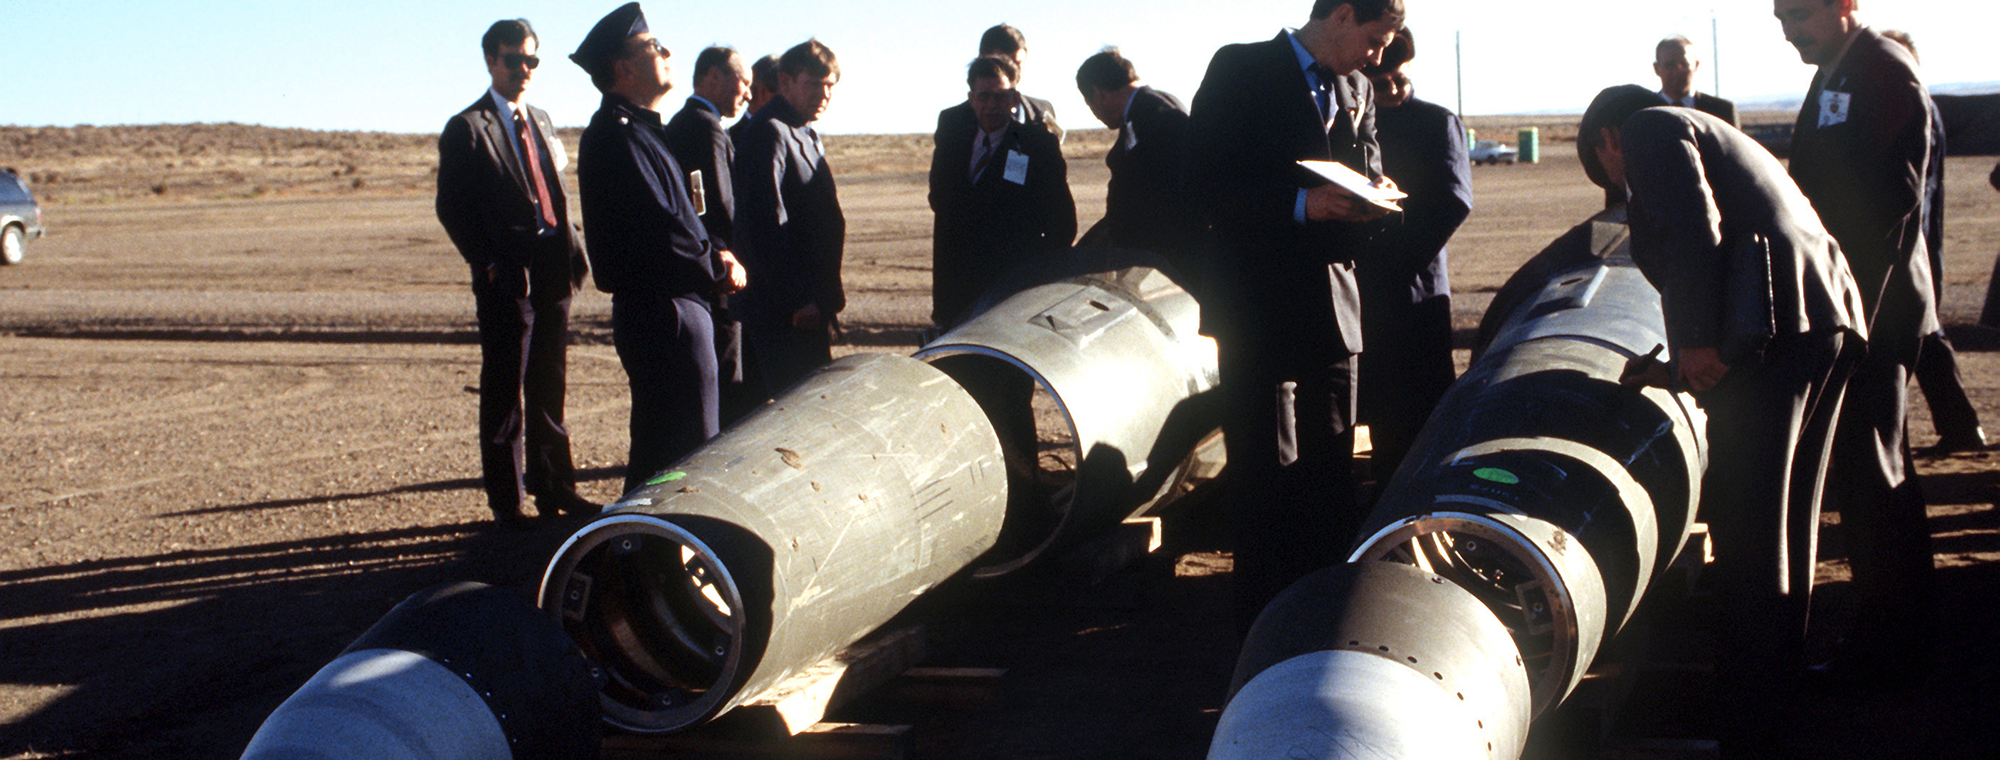 Soviet Inspection of American Pershing II Missiles in 1989